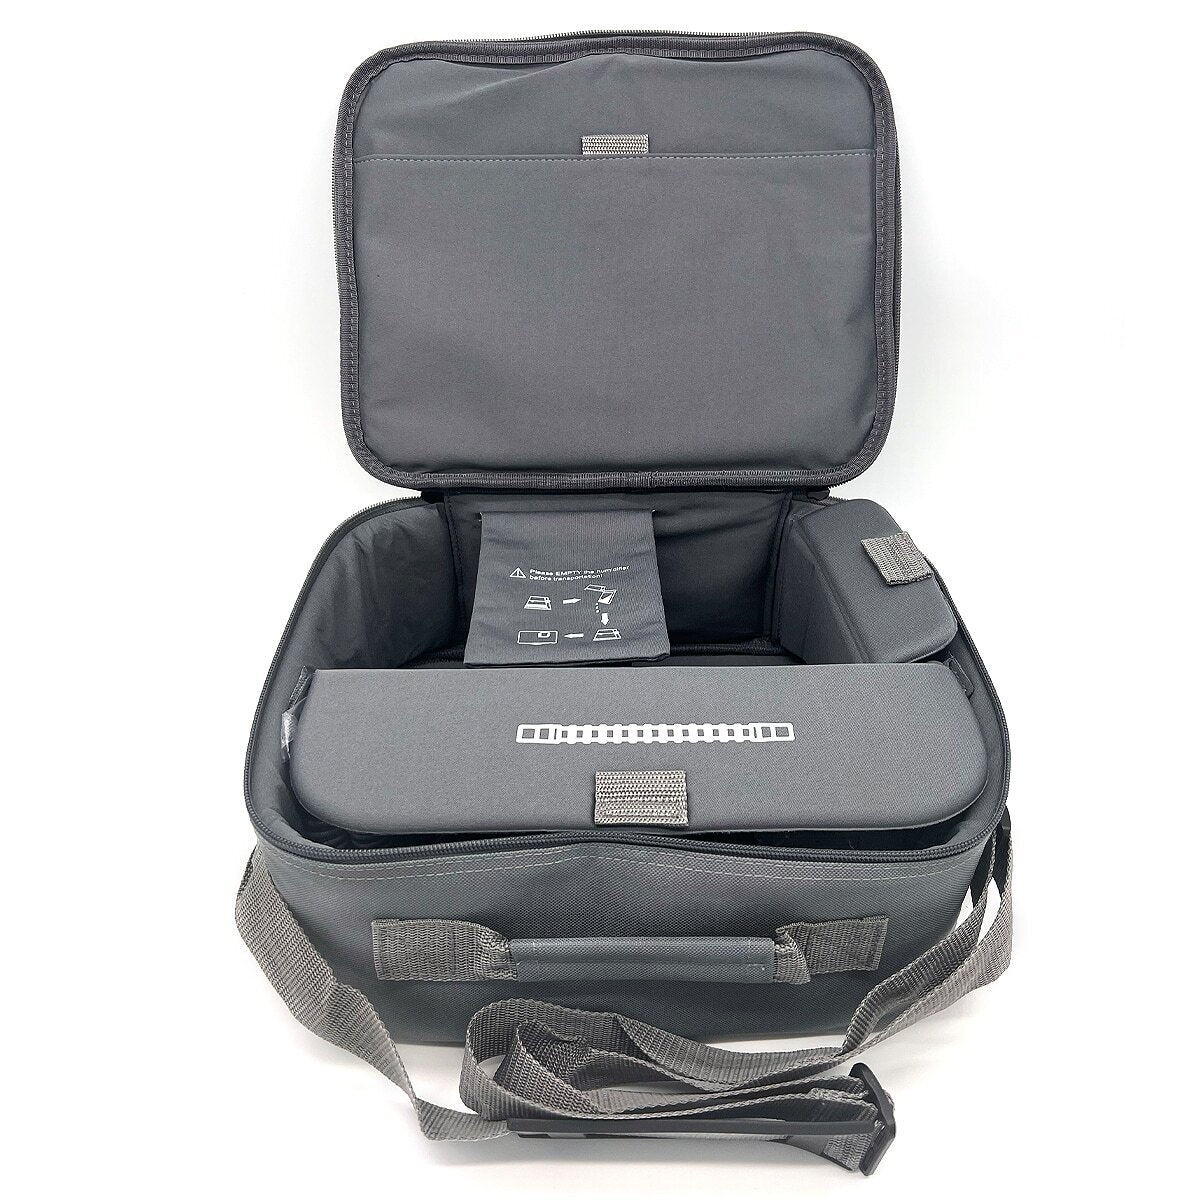 Carrying Case for Luna G3 Series CPAP & BiPAP Machines